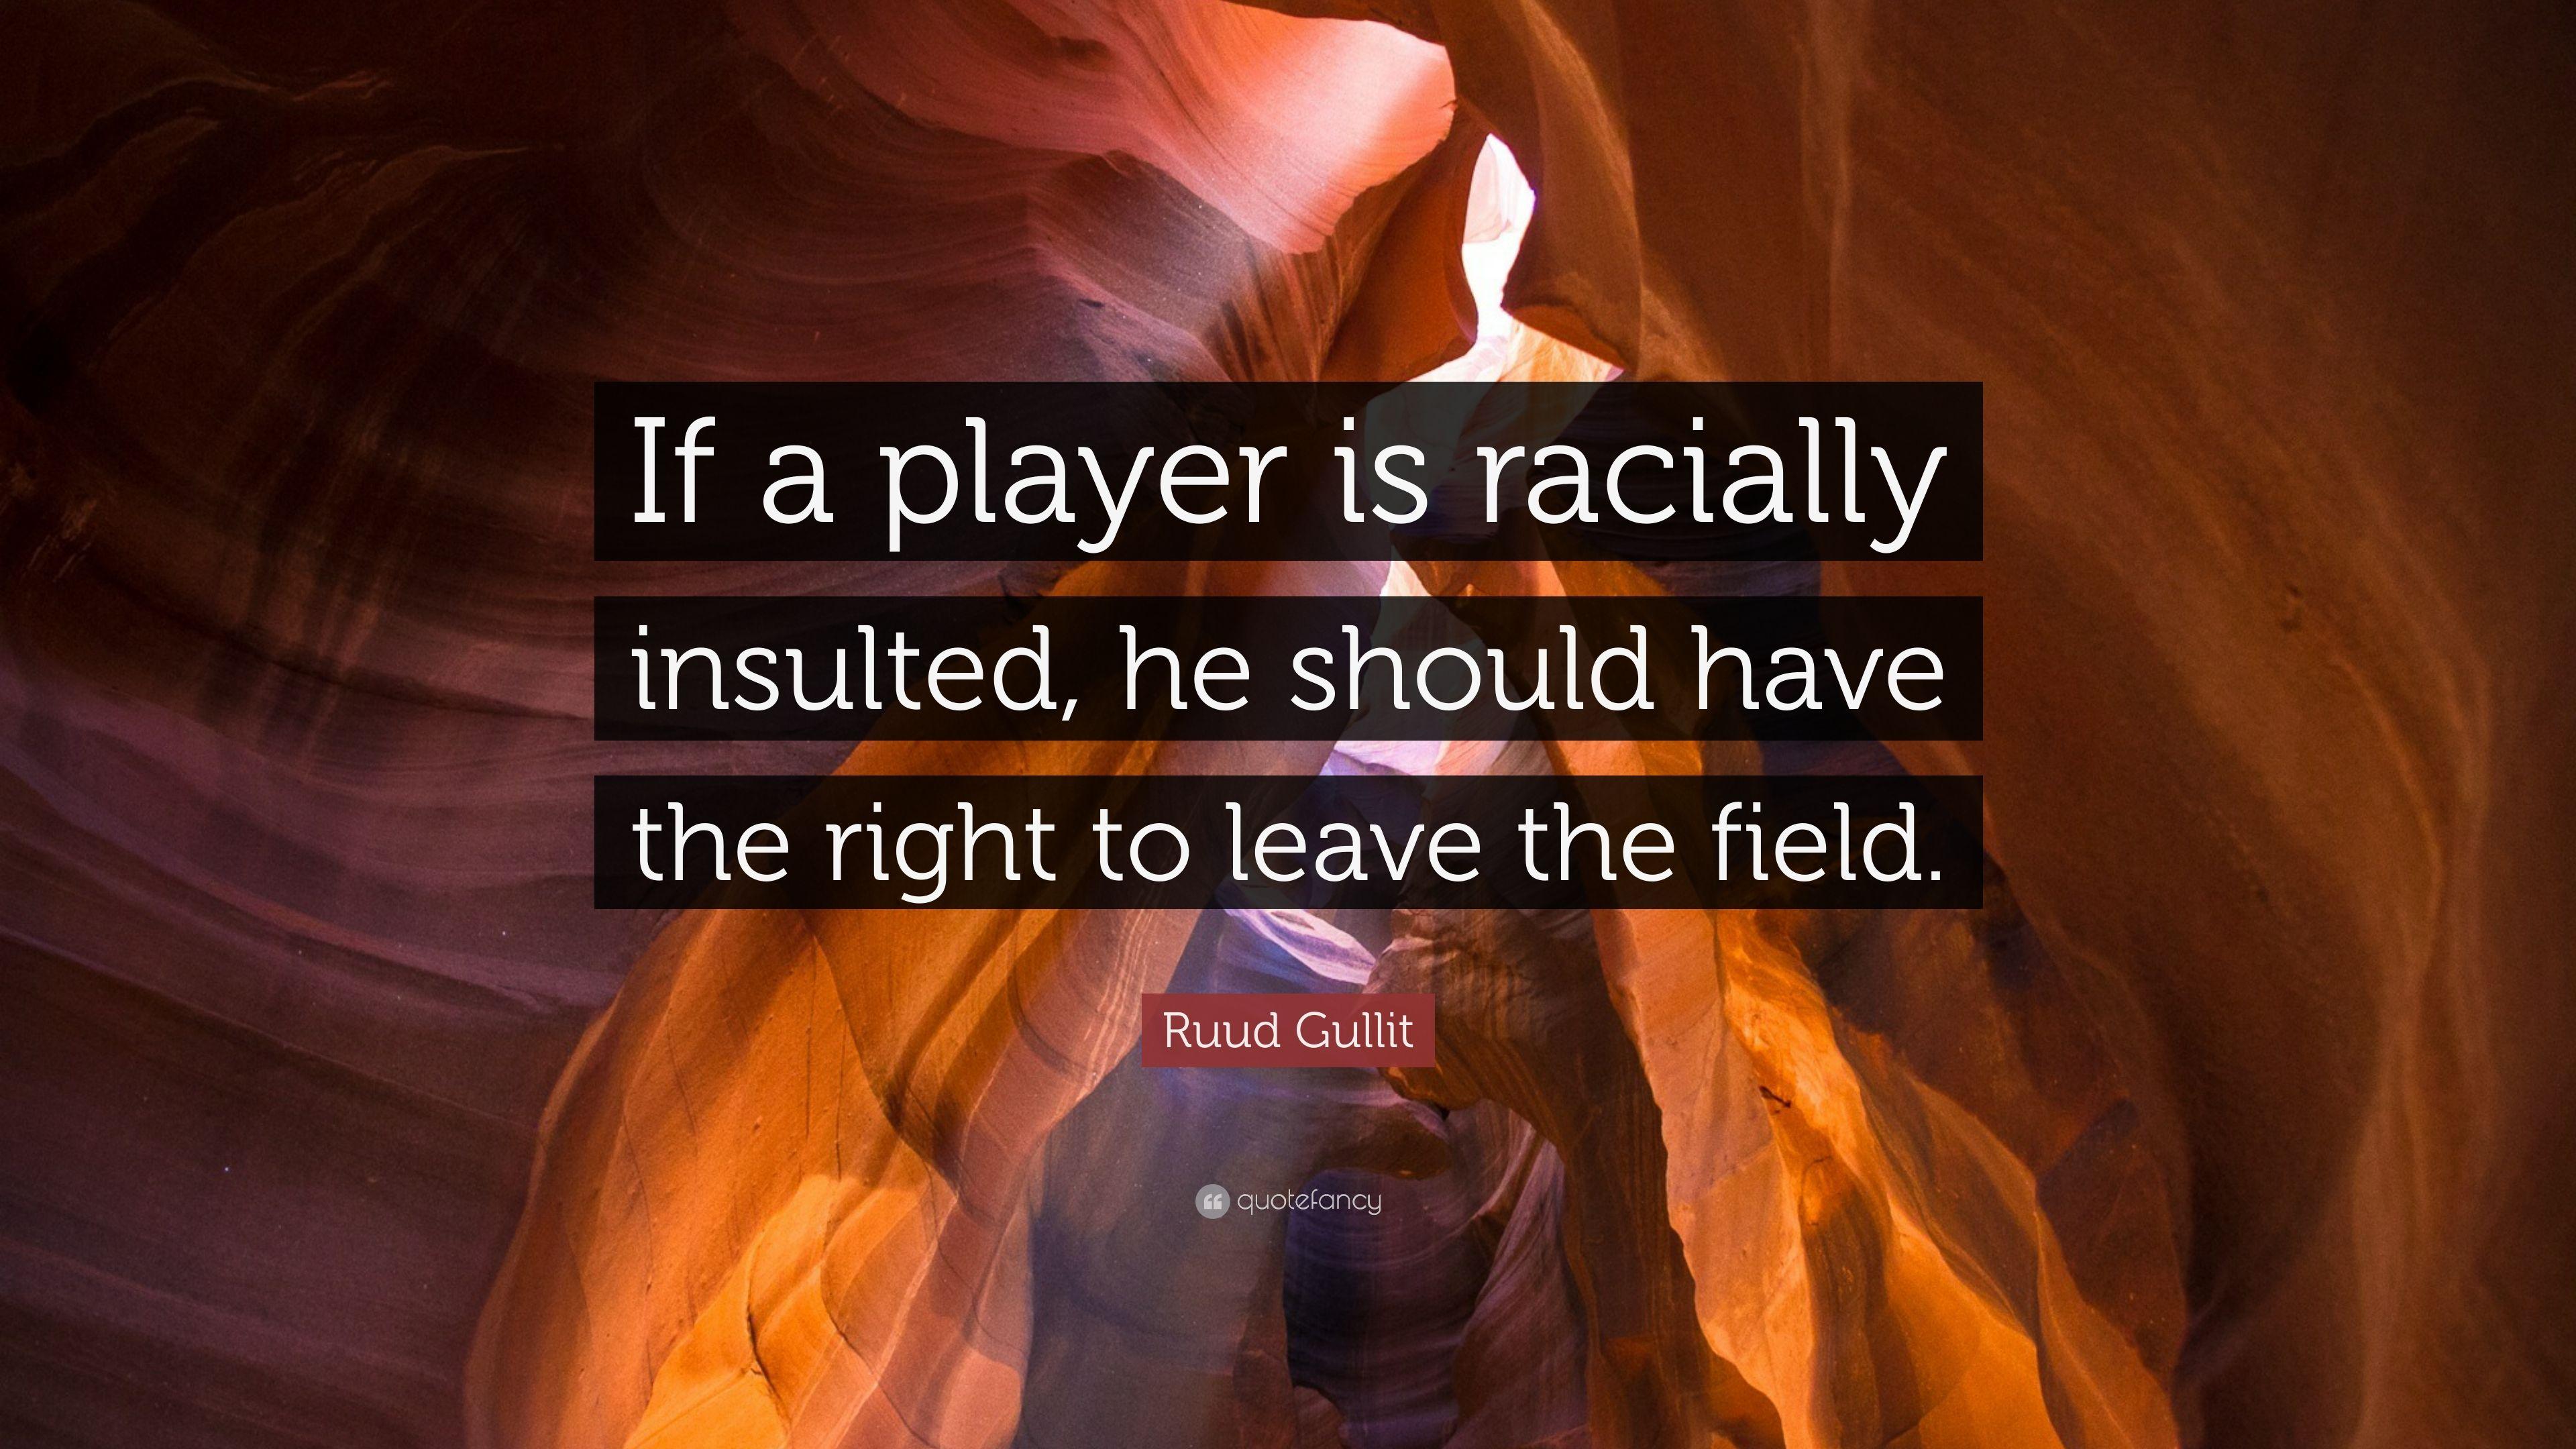 Ruud Gullit Quote: “If a player is racially insulted, he should have